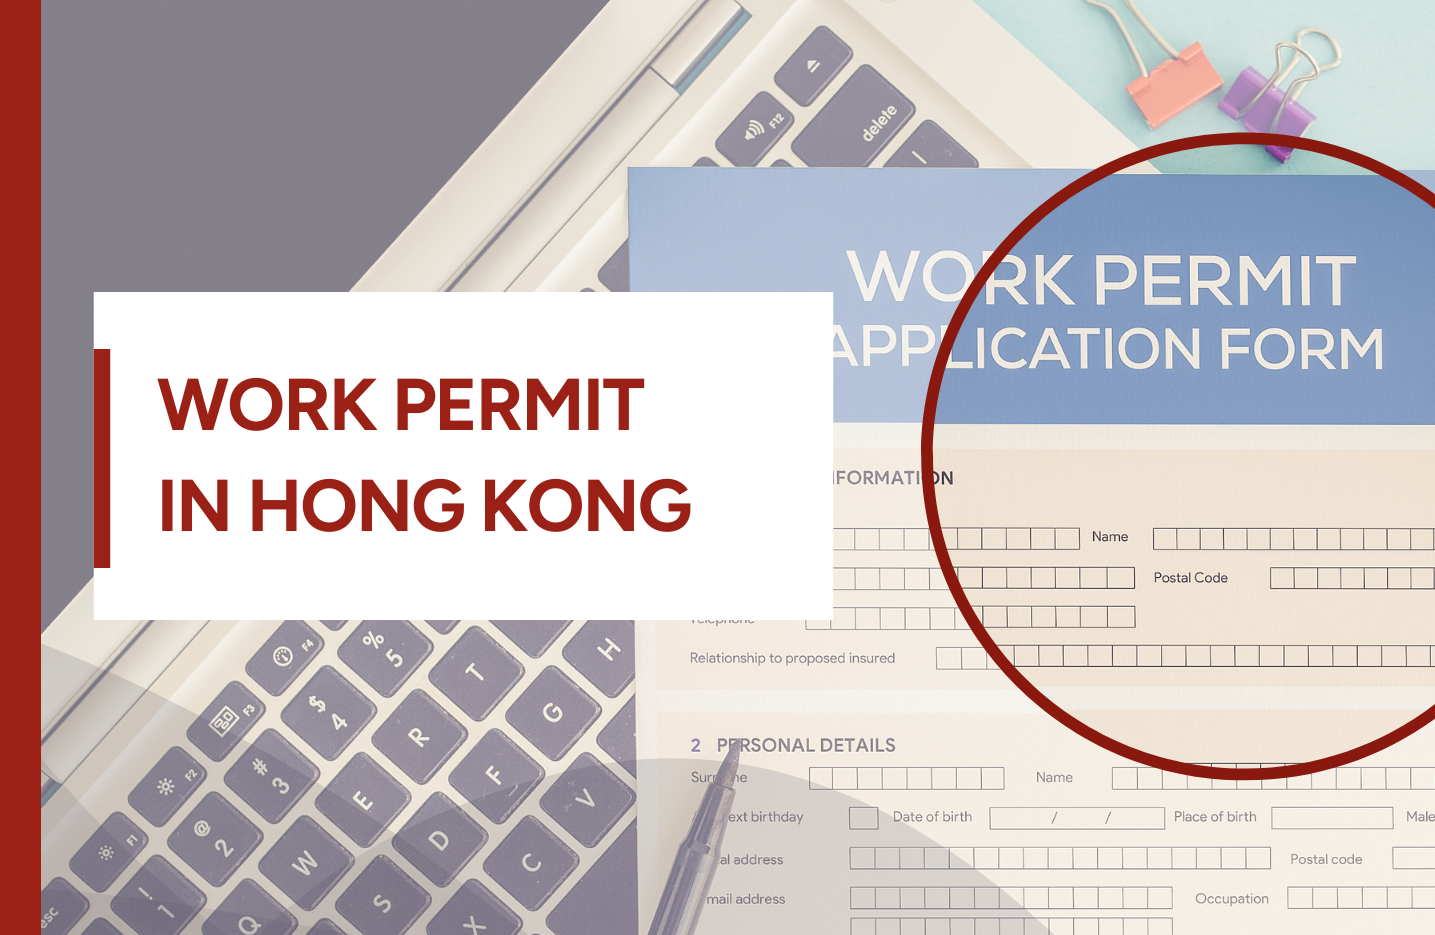 All the information you need to know about work permit in Hong Kong